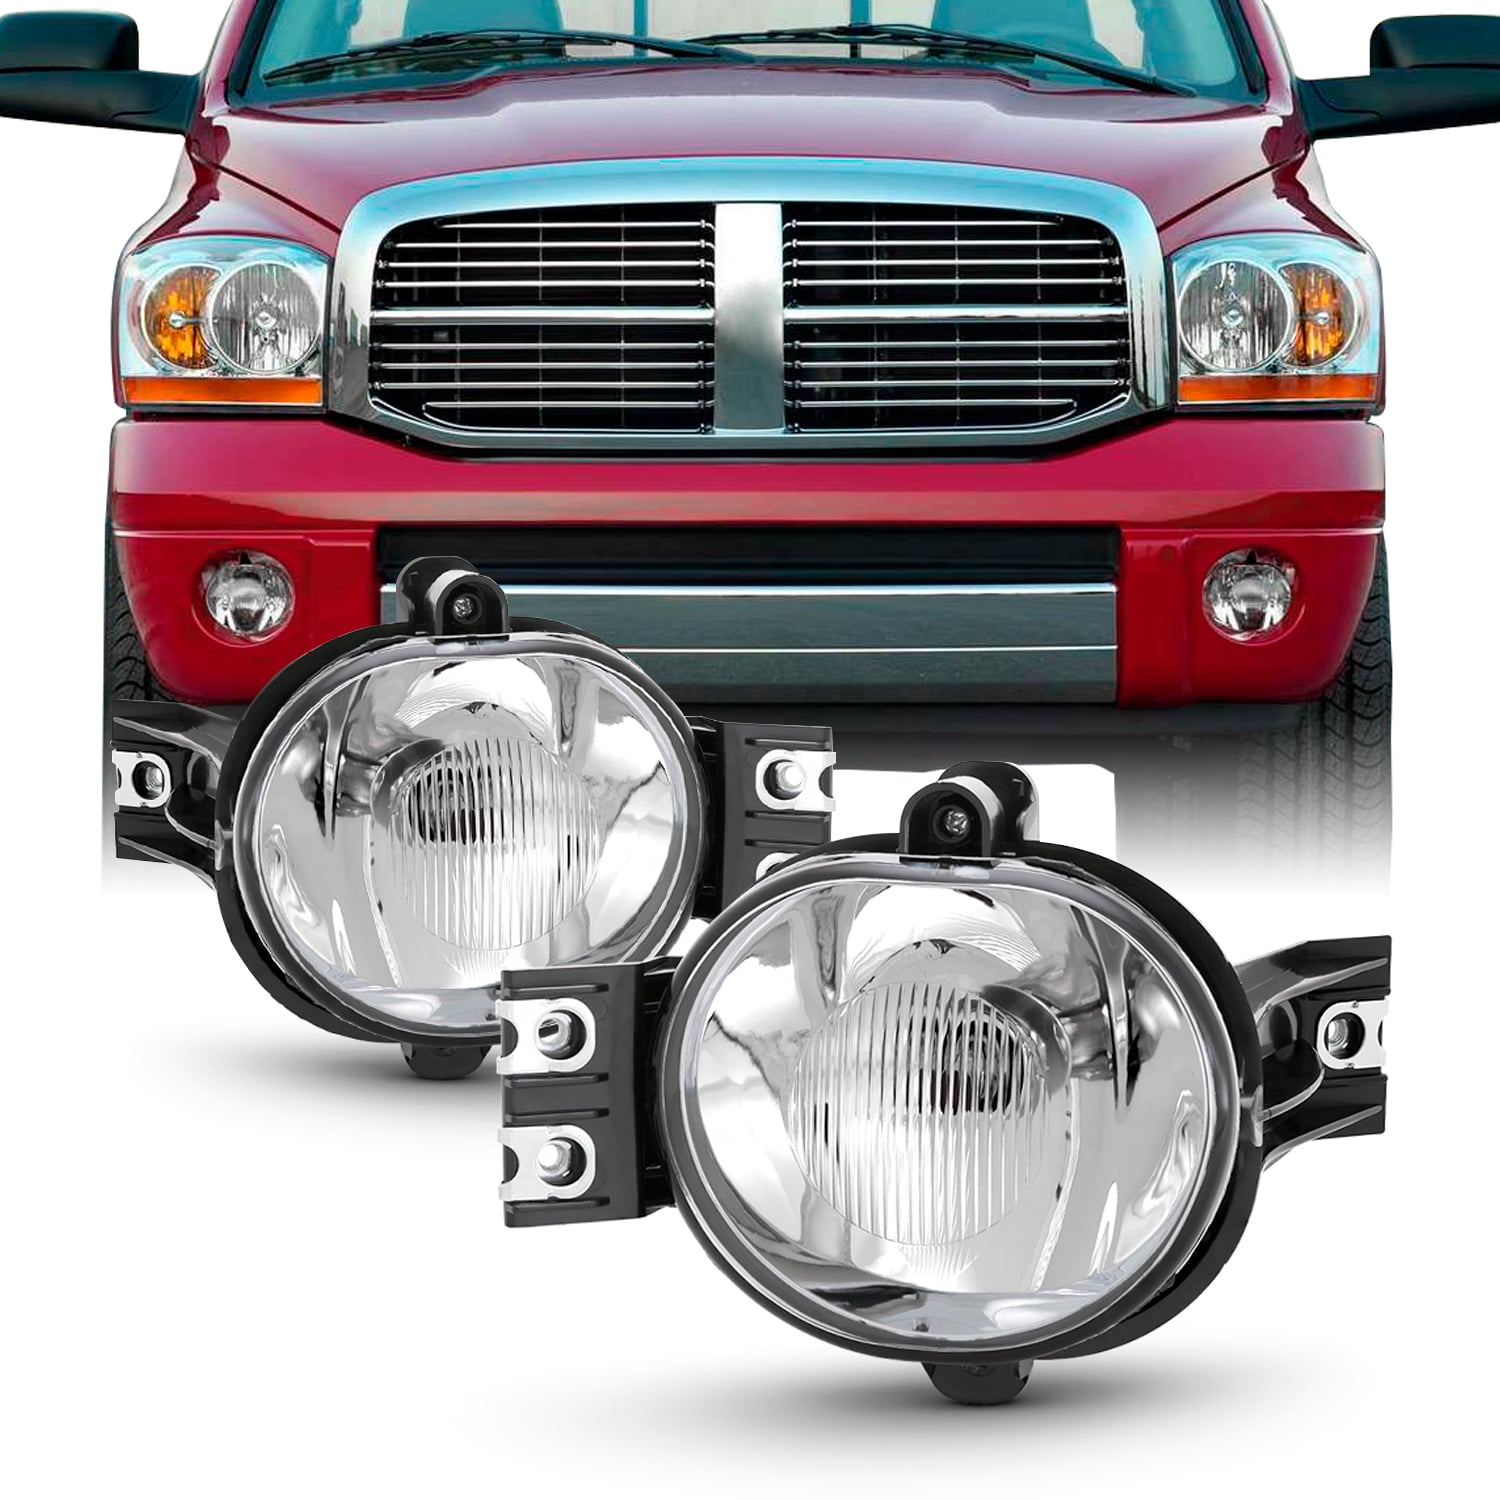 55077475AE Driving Fog Lights with Clear Lens for 02-08 Dodge Ram 1500 03-09 Dodge Ram 2500 03-10 Dodge Ram 3500 Fog Lamps for Passenger and Driver Side with OE Part # 55077474AE 